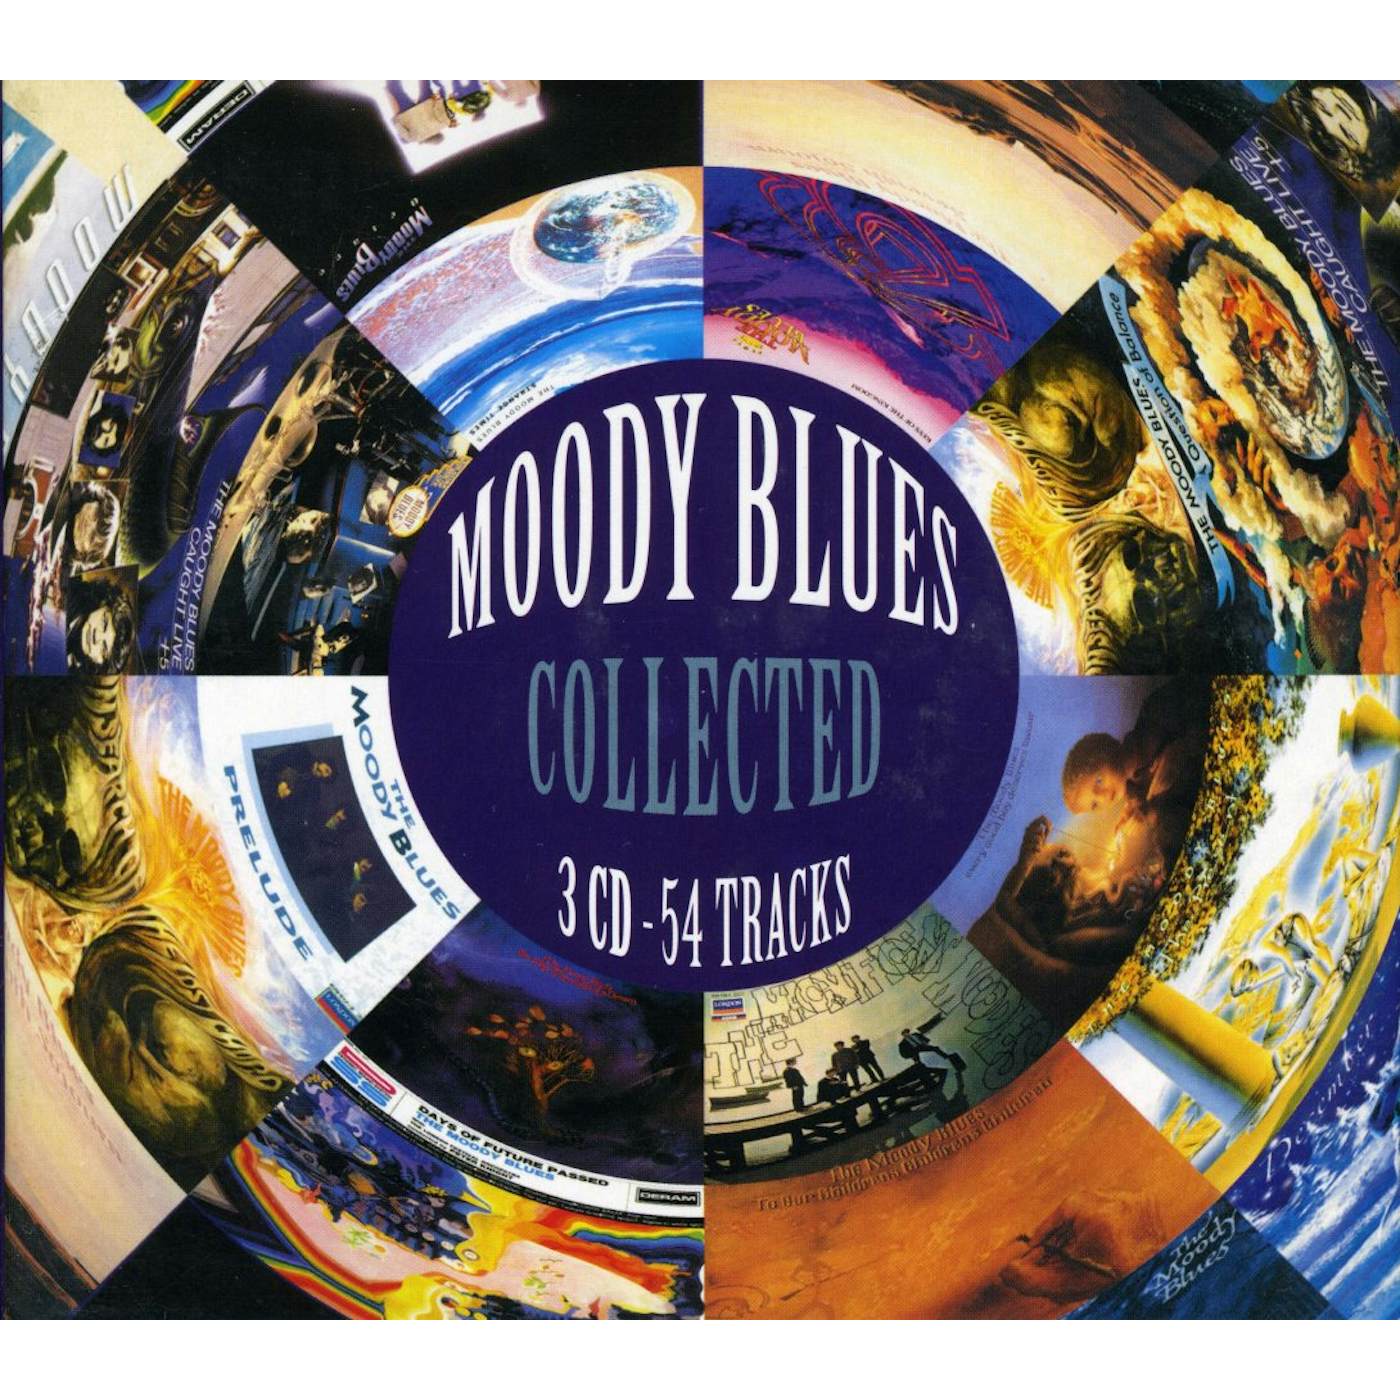 The Moody Blues COLLECTED CD